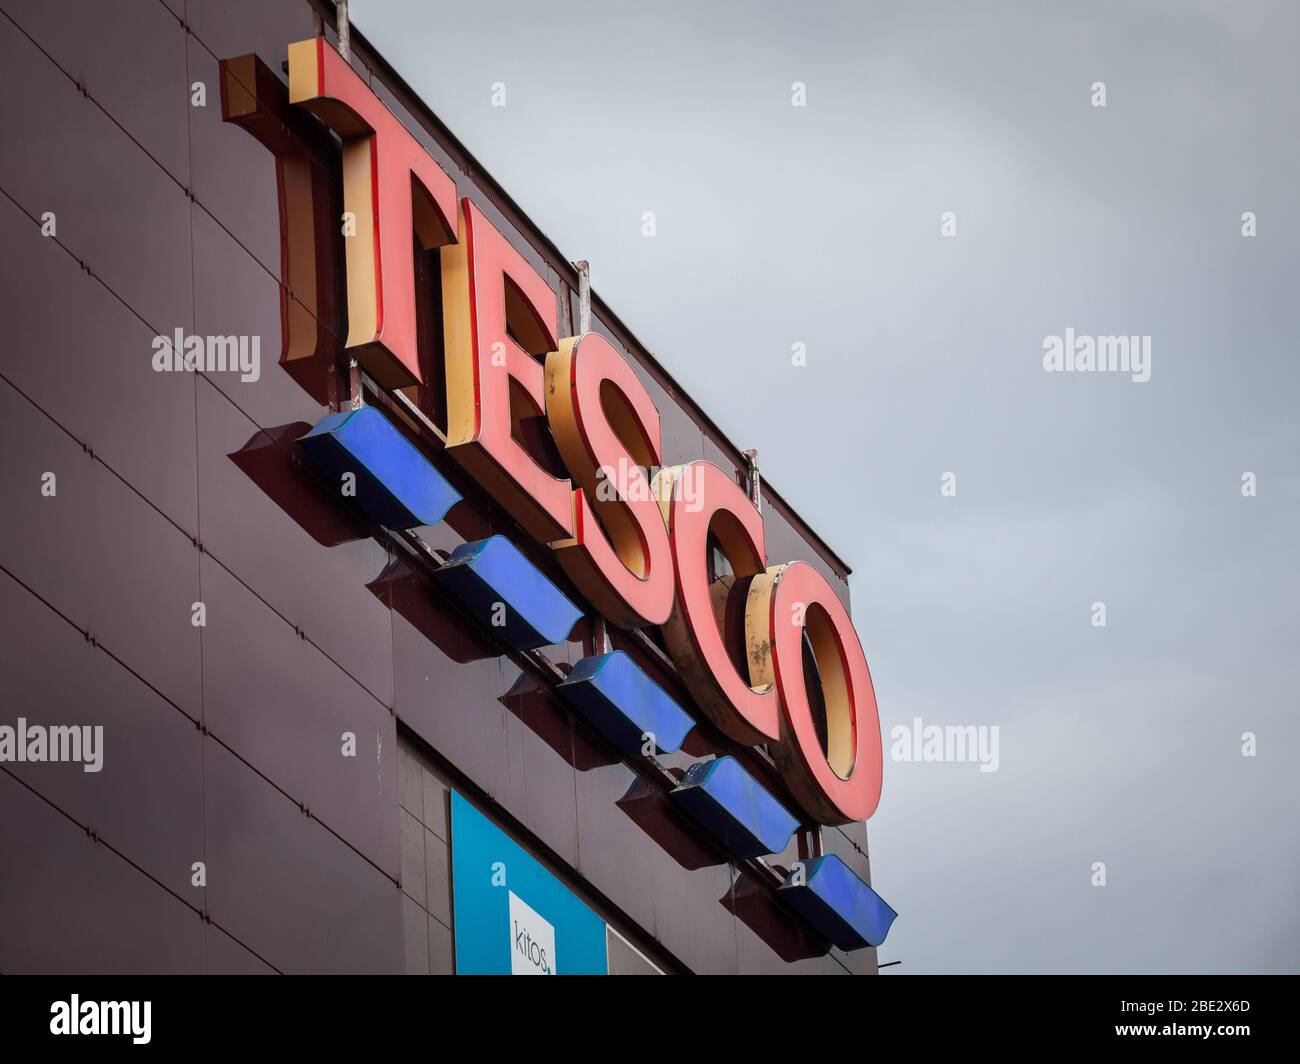 PRAGUE, CZECHIA - NOVEMBER 4, 2019: Tesco logo on their main supermaket in Szeged. Tesco is a british supermarket, groceries and general merchandise r Stock Photo